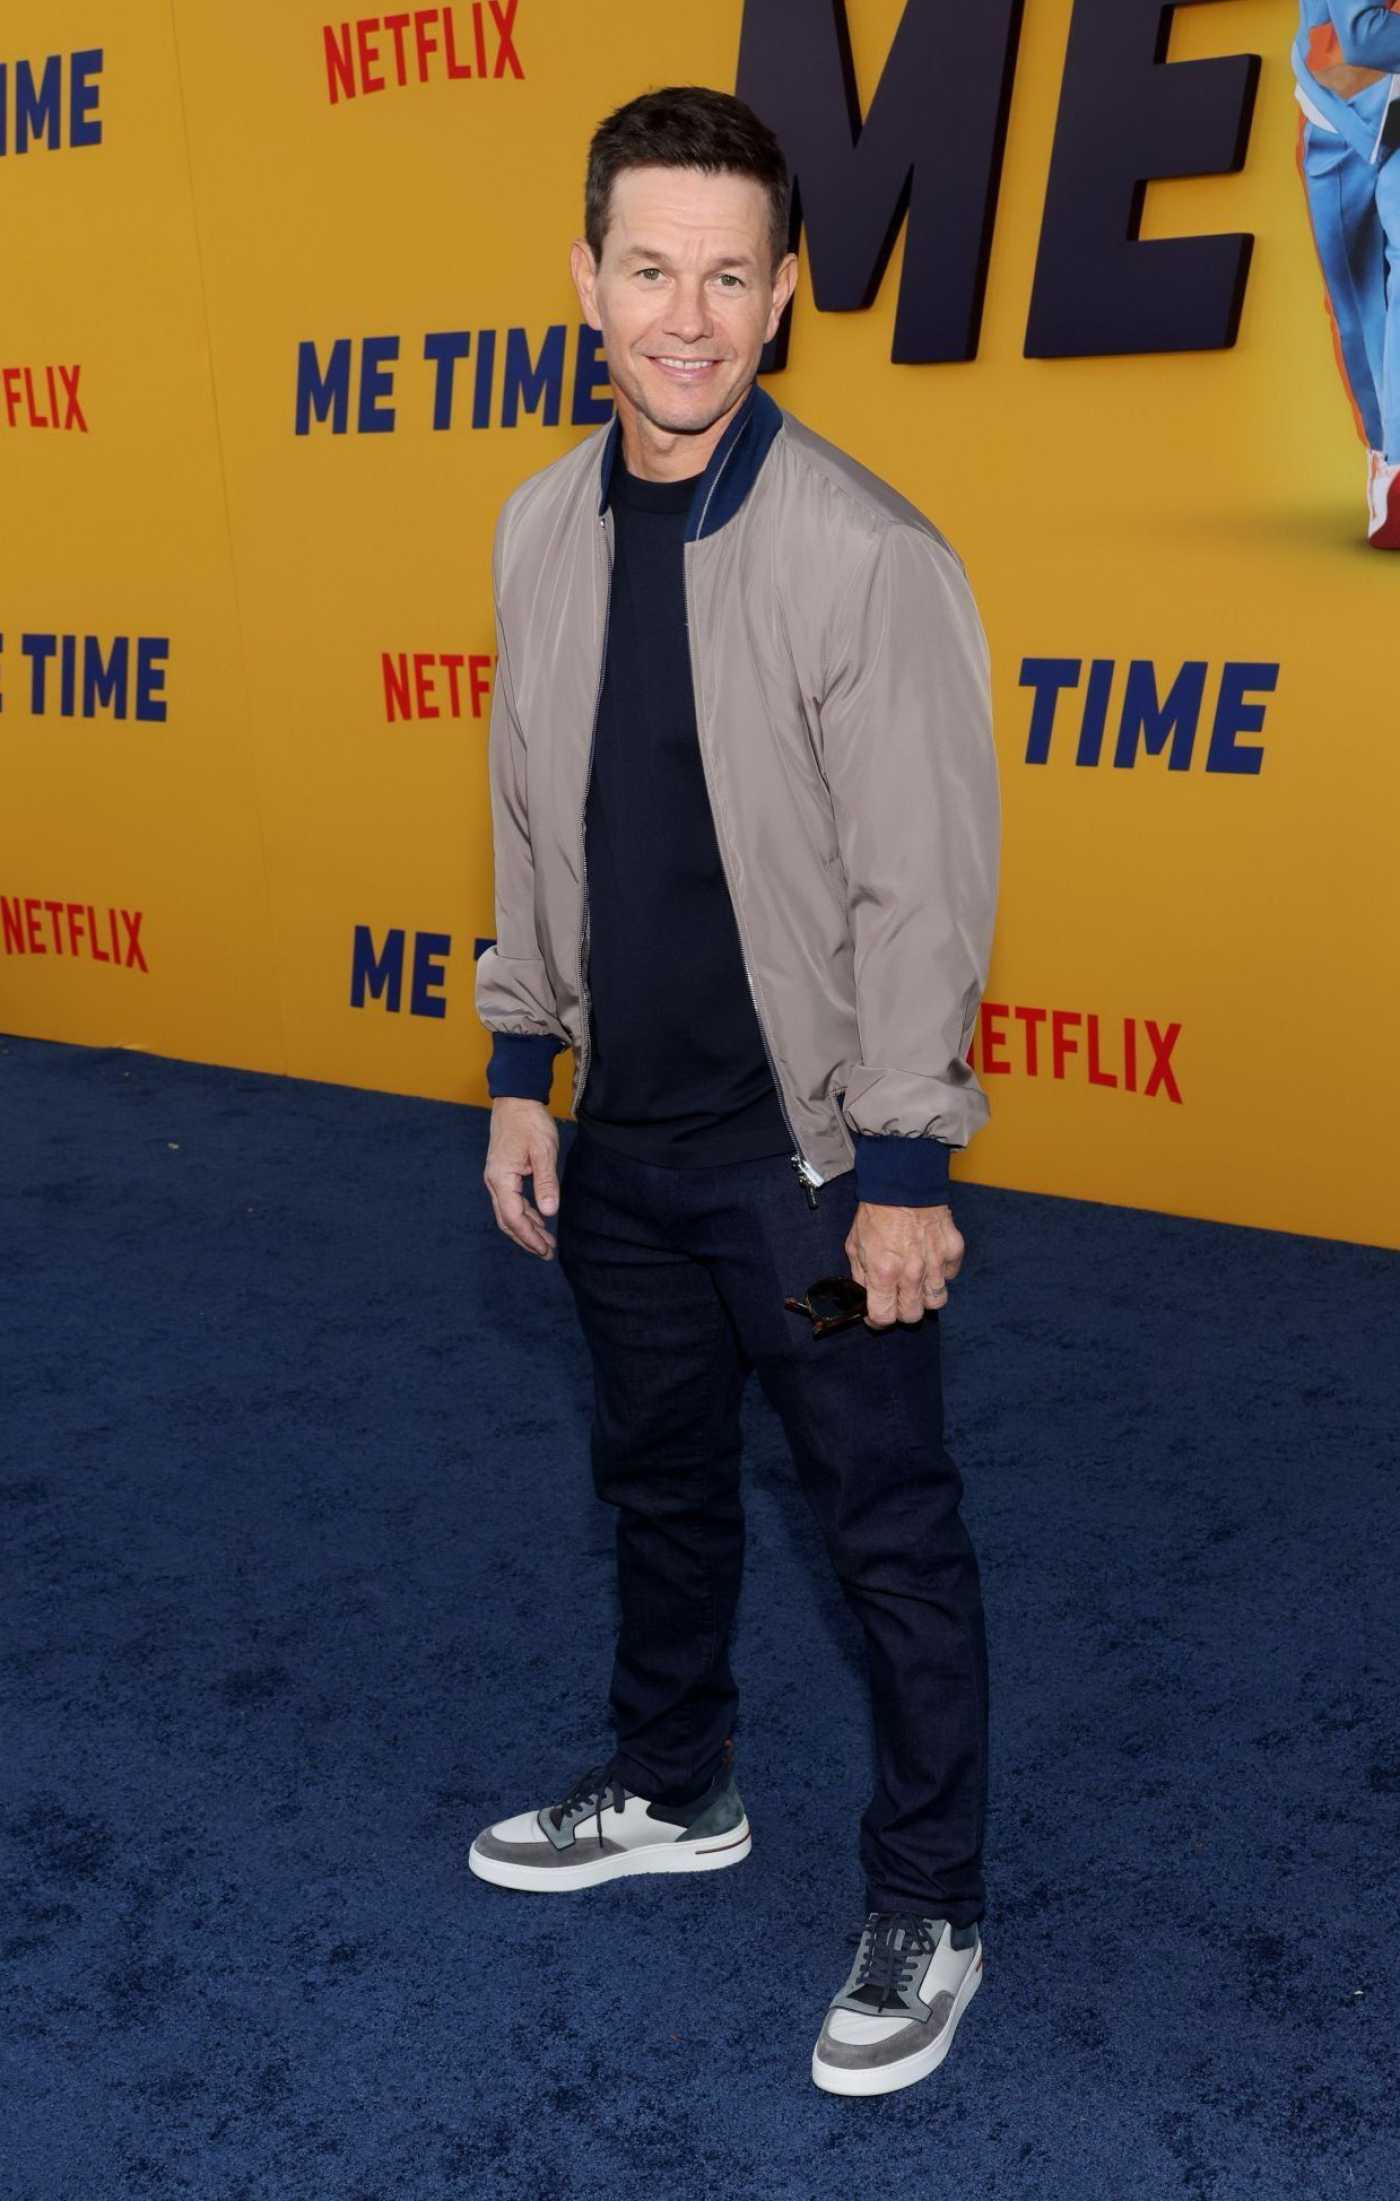 Mark Wahlberg Attends Premiere of Netflix's Me Time in Los Angeles 08/23/2022